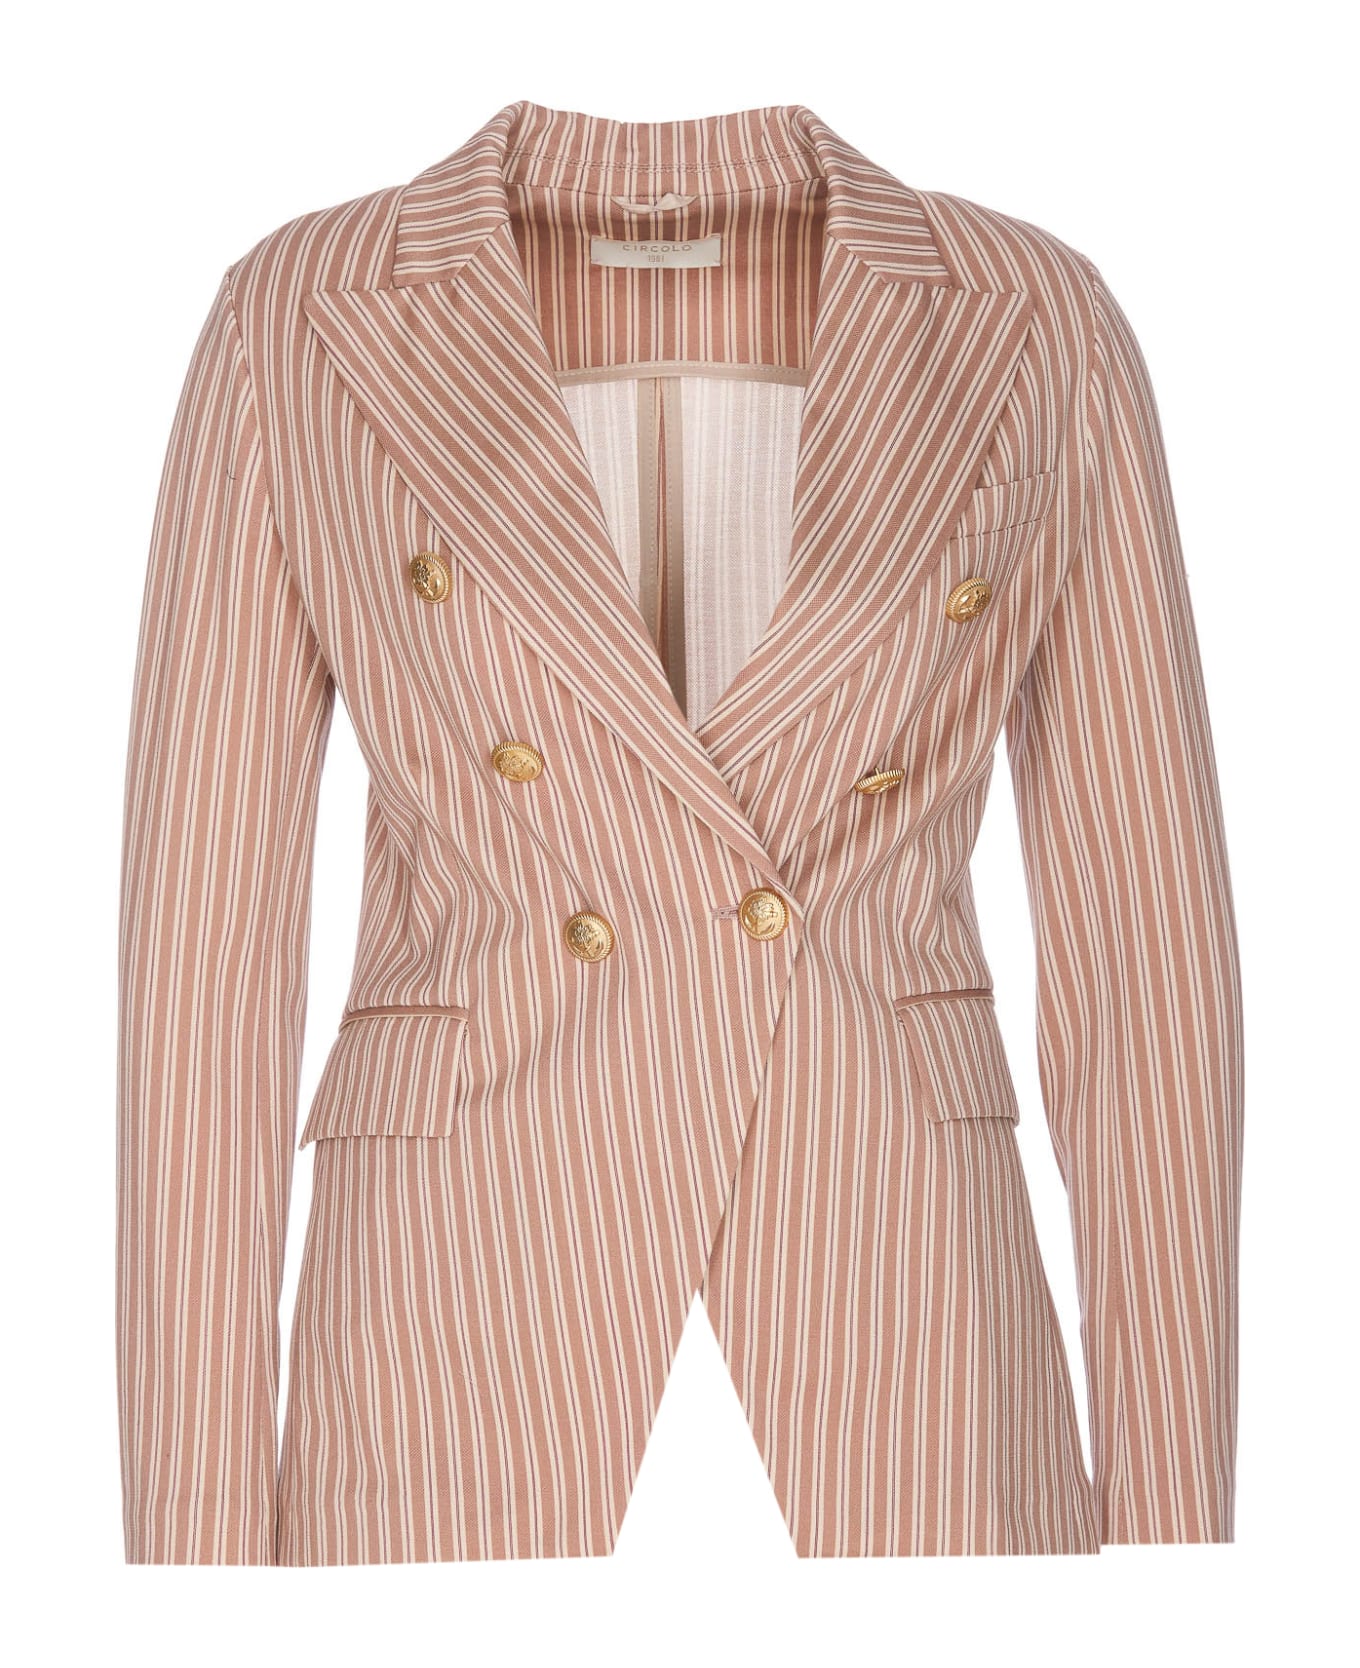 Circolo 1901 Double Breasted Buttons Jacket - Pink